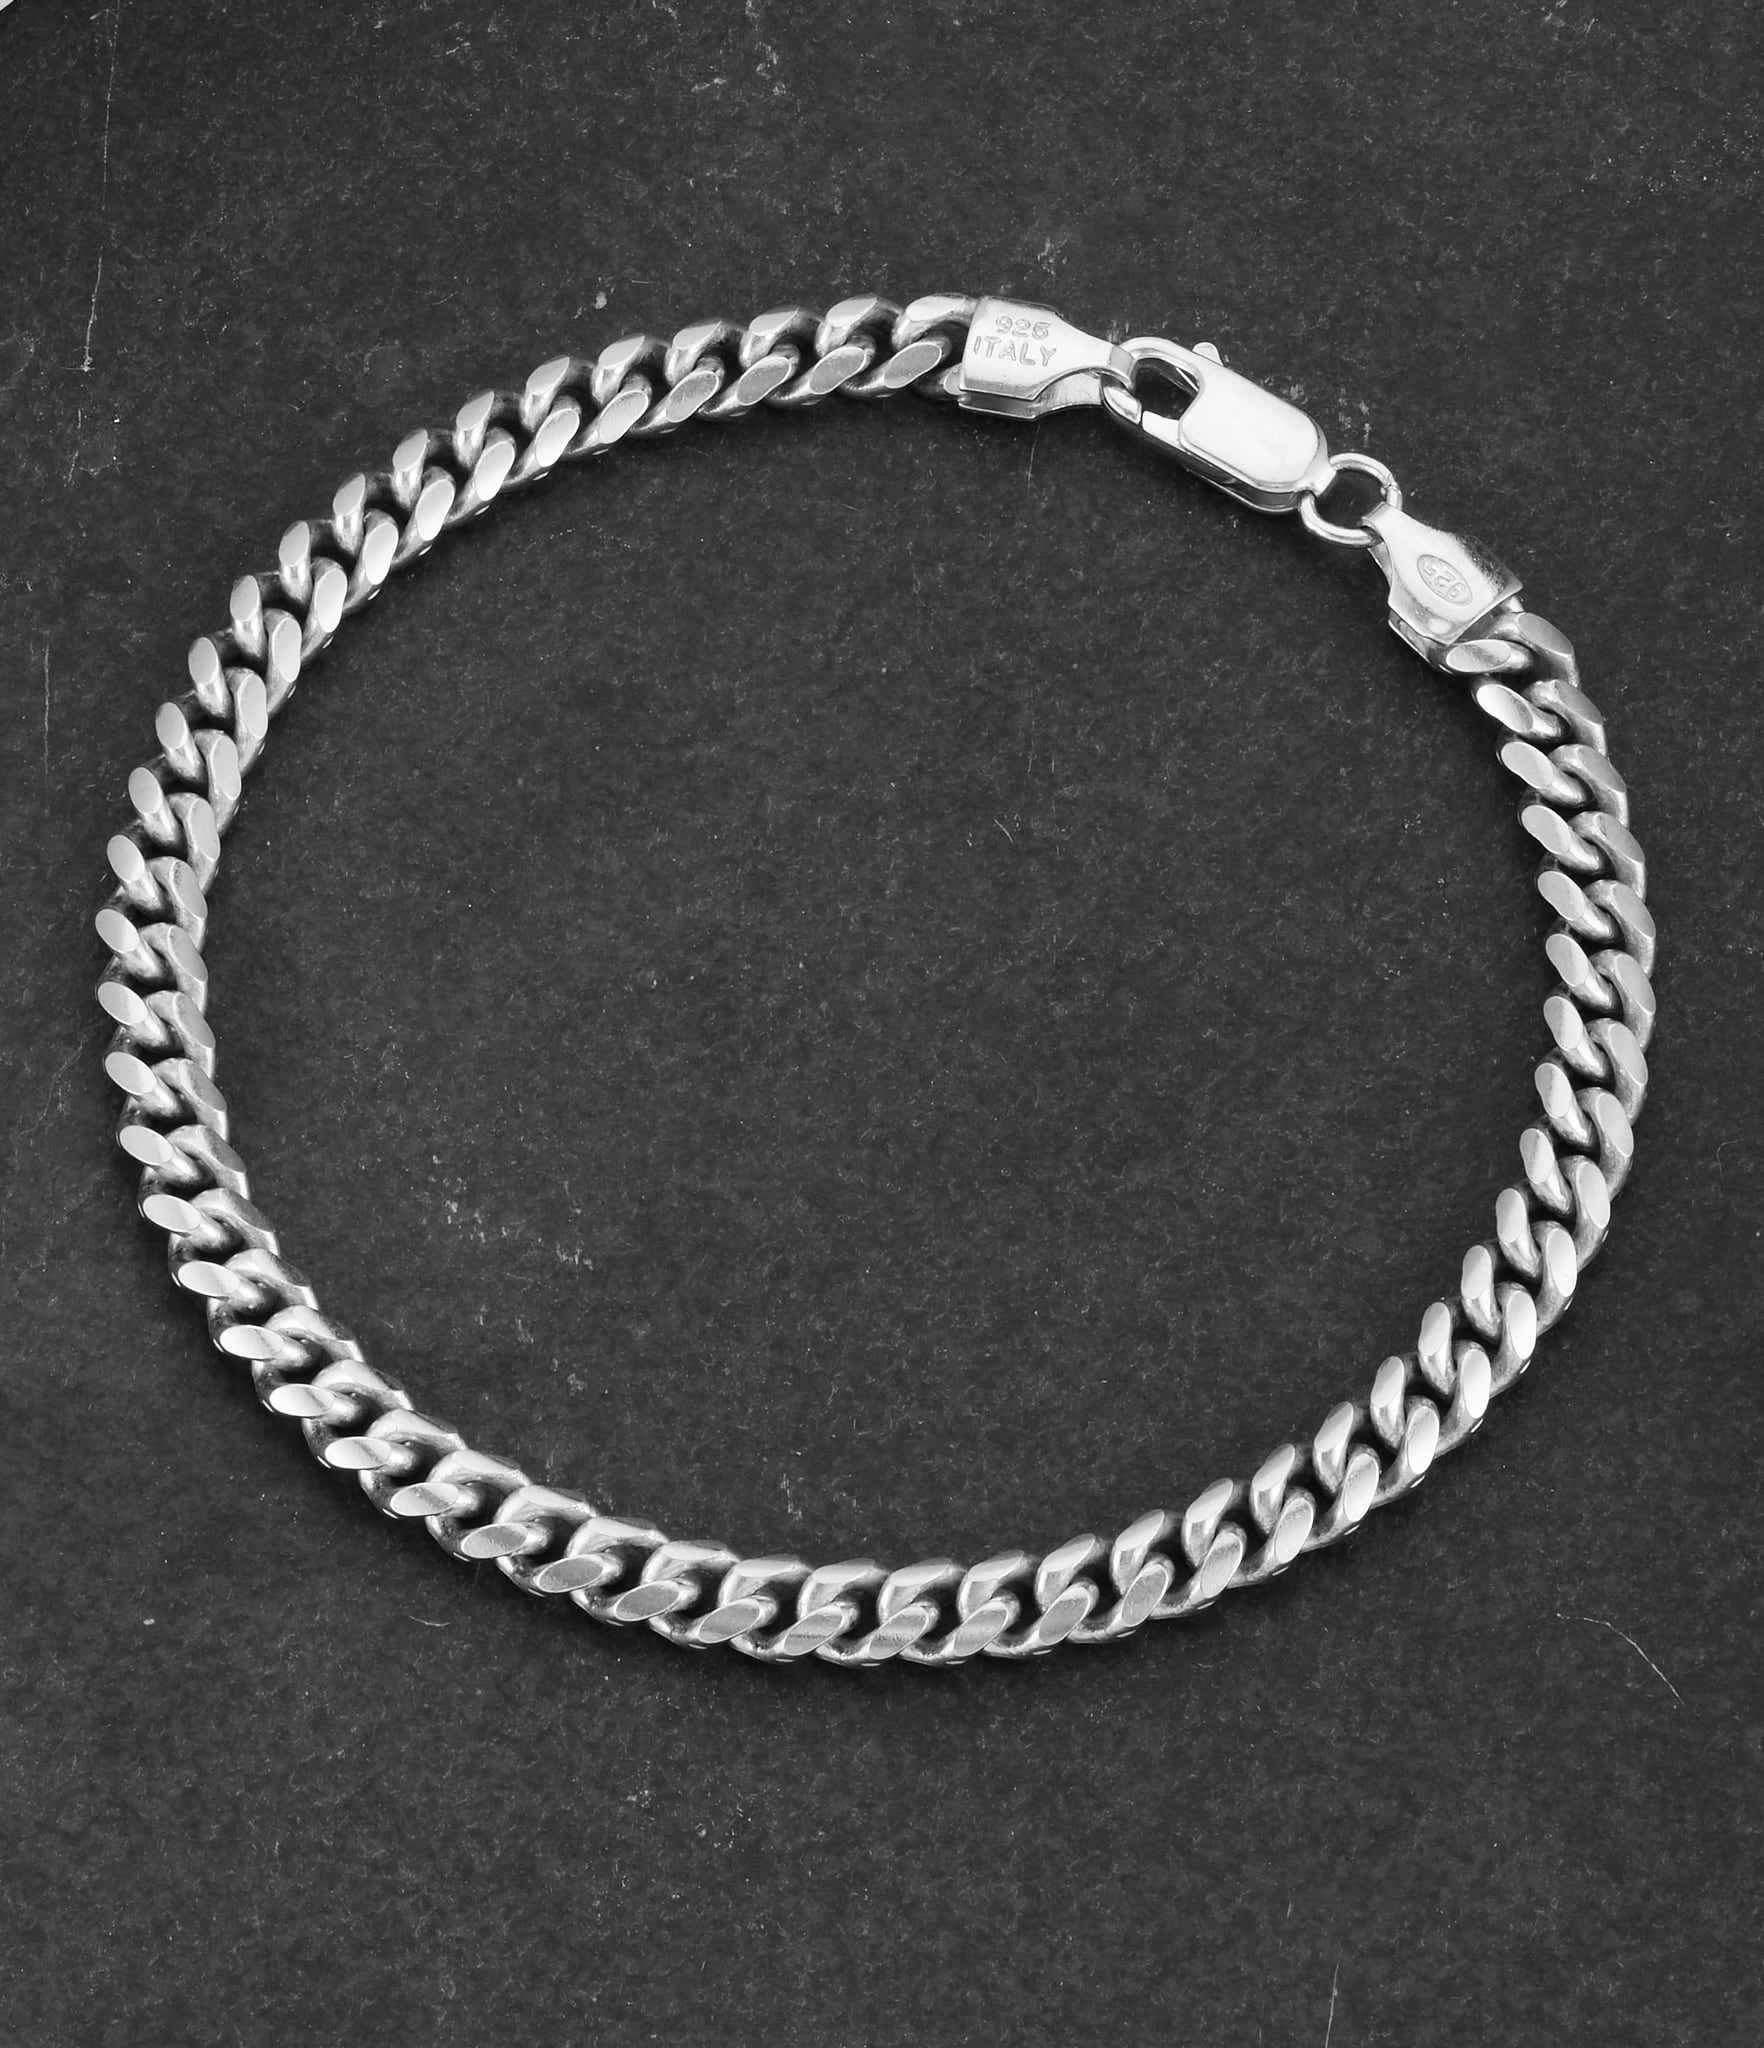 Image Cuban Link Bracelet - 5mm Silver - Crafted in Italy